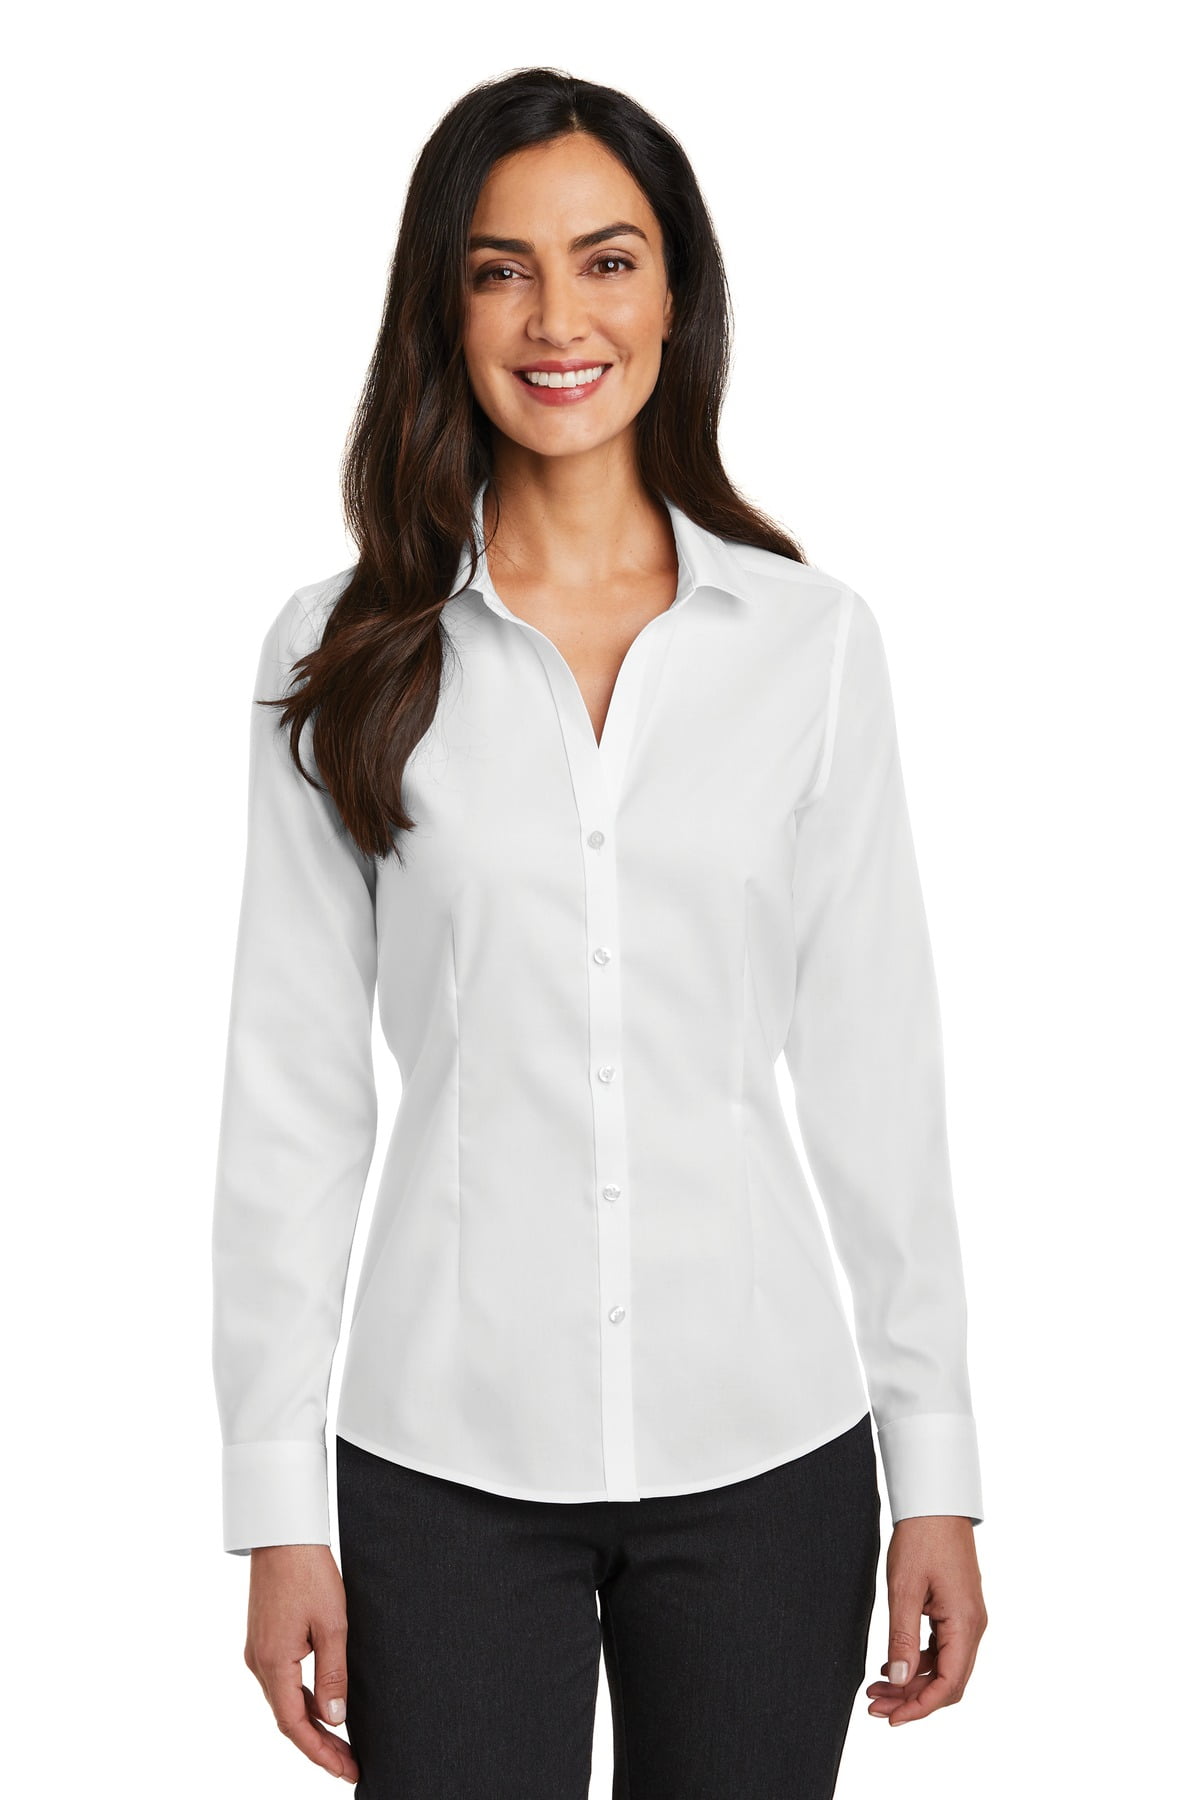 Red House Womens Non Iron Pinpoint Oxford 